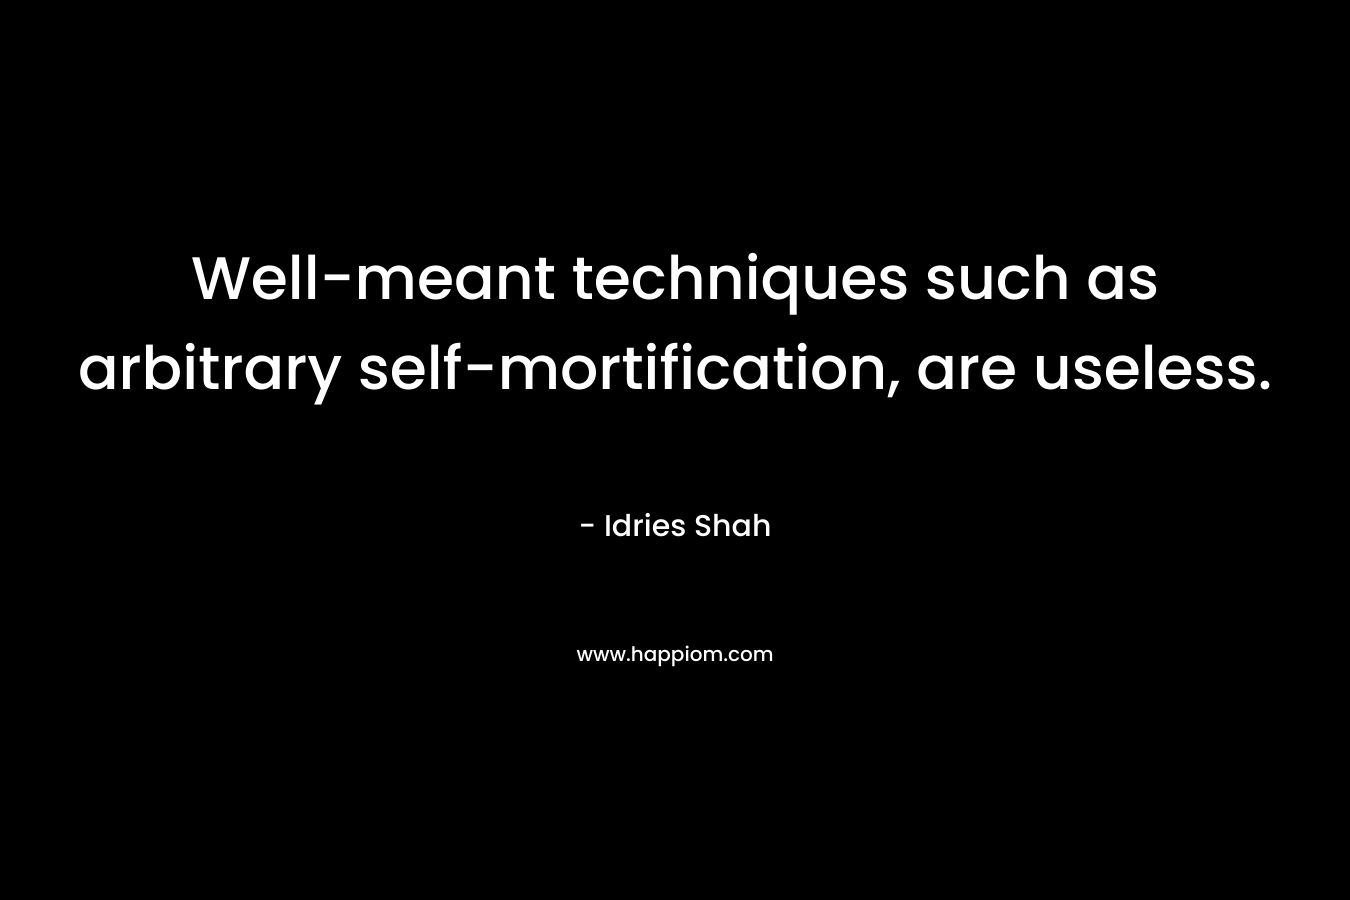 Well-meant techniques such as arbitrary self-mortification, are useless.